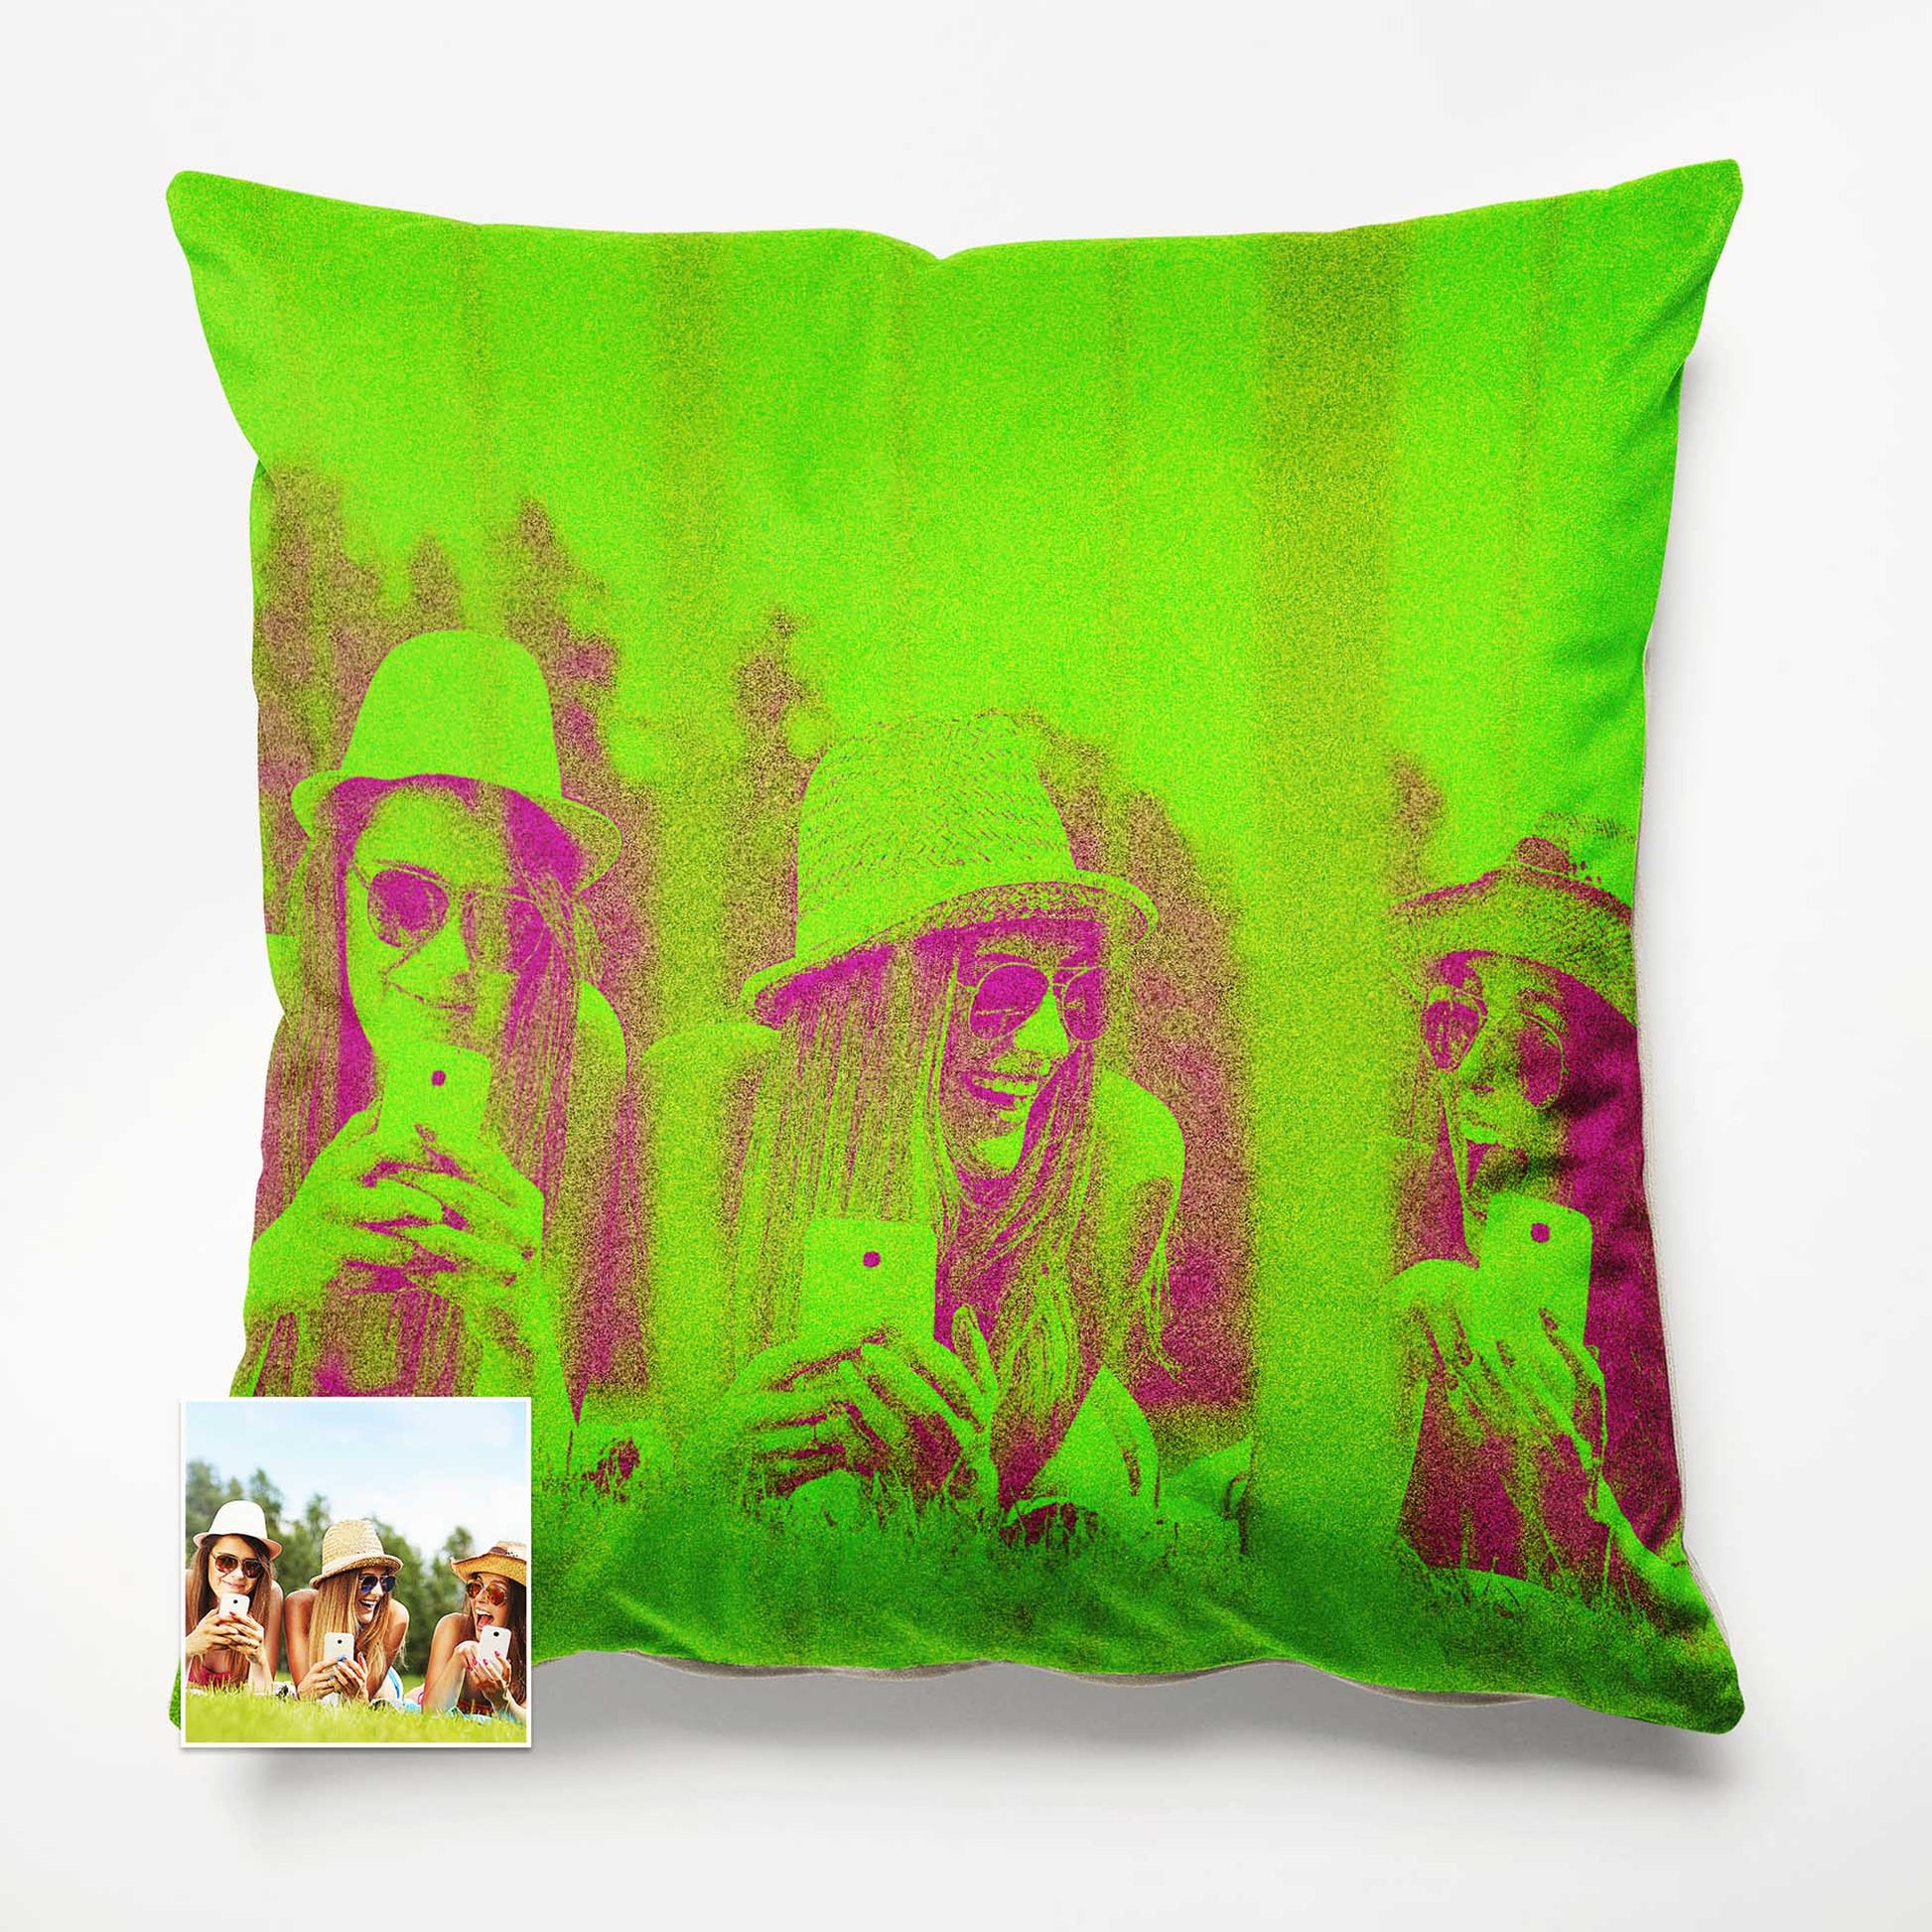 Add a pop of color and excitement to your home decor with the Personalised Neon Green Cushion. Its fresh and fun design instantly uplifts the ambiance, making it perfect for parties or simply adding a vibrant touch, handmade